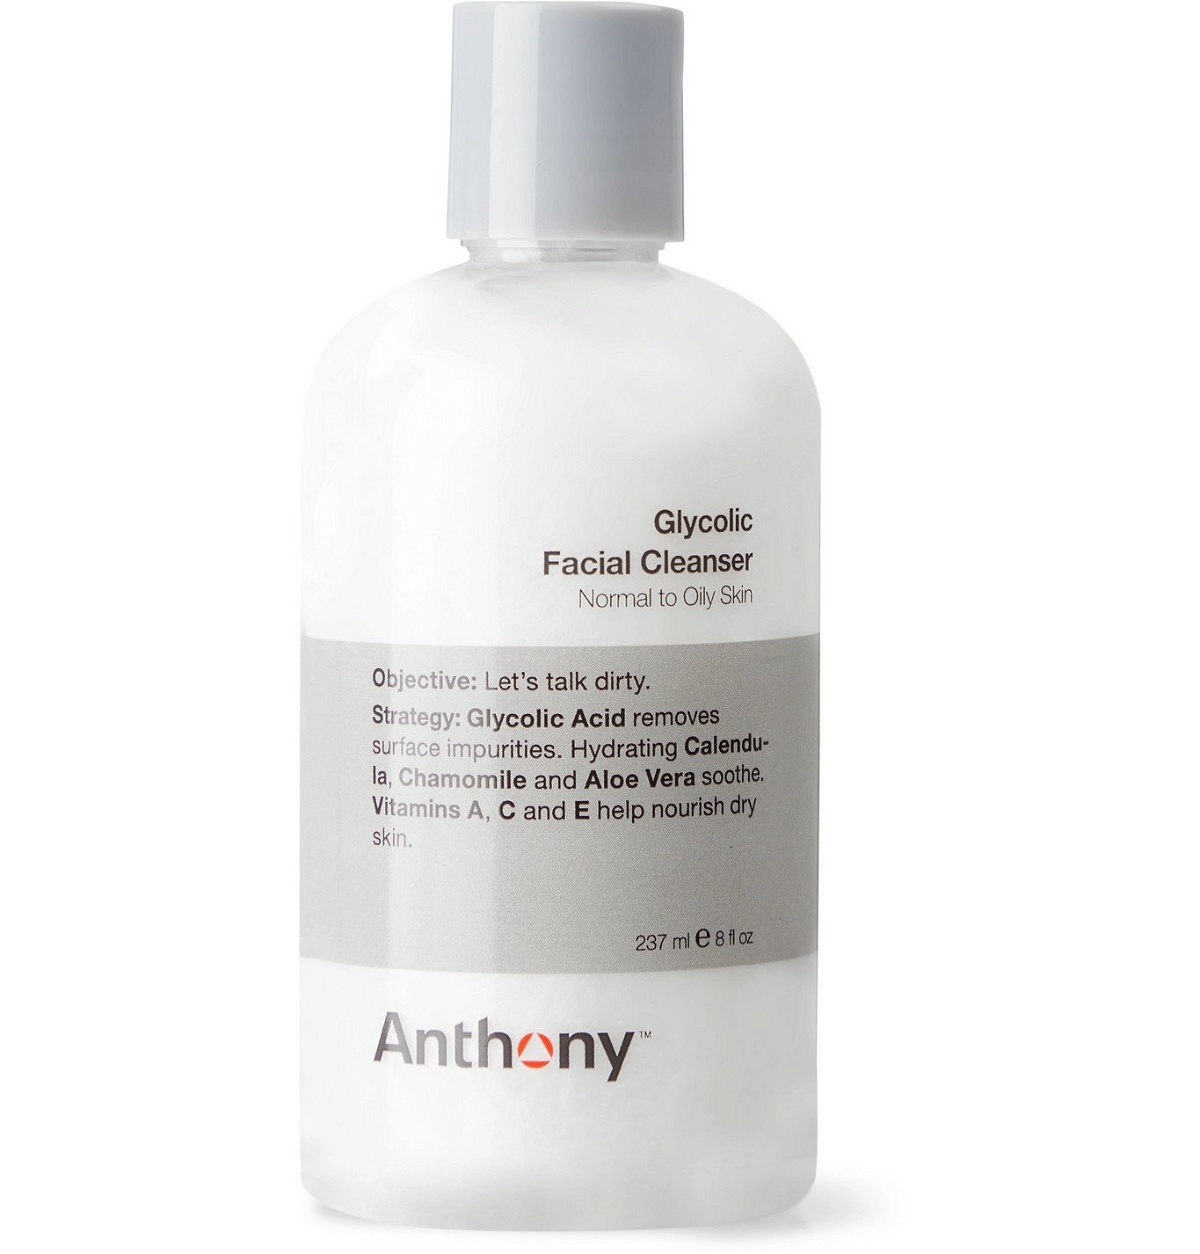 Photo: Anthony - Glycolic Facial Cleanser, 237ml - Colorless